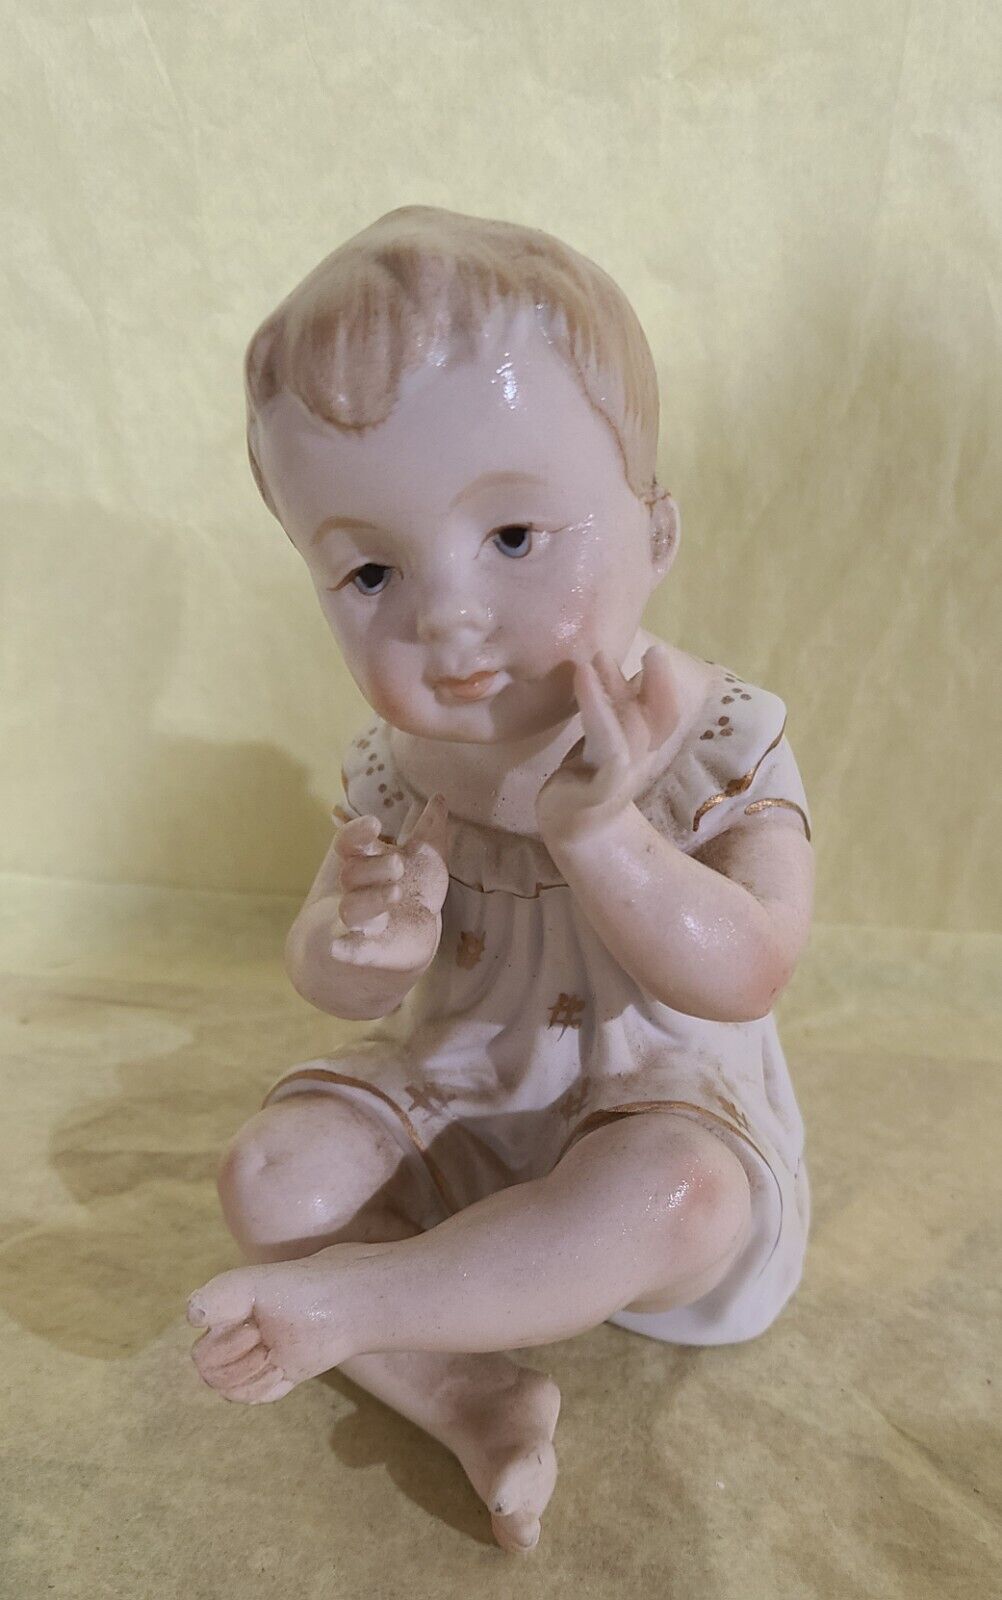 Vintage Porcelain Bisque Handpainted Piano Baby 6